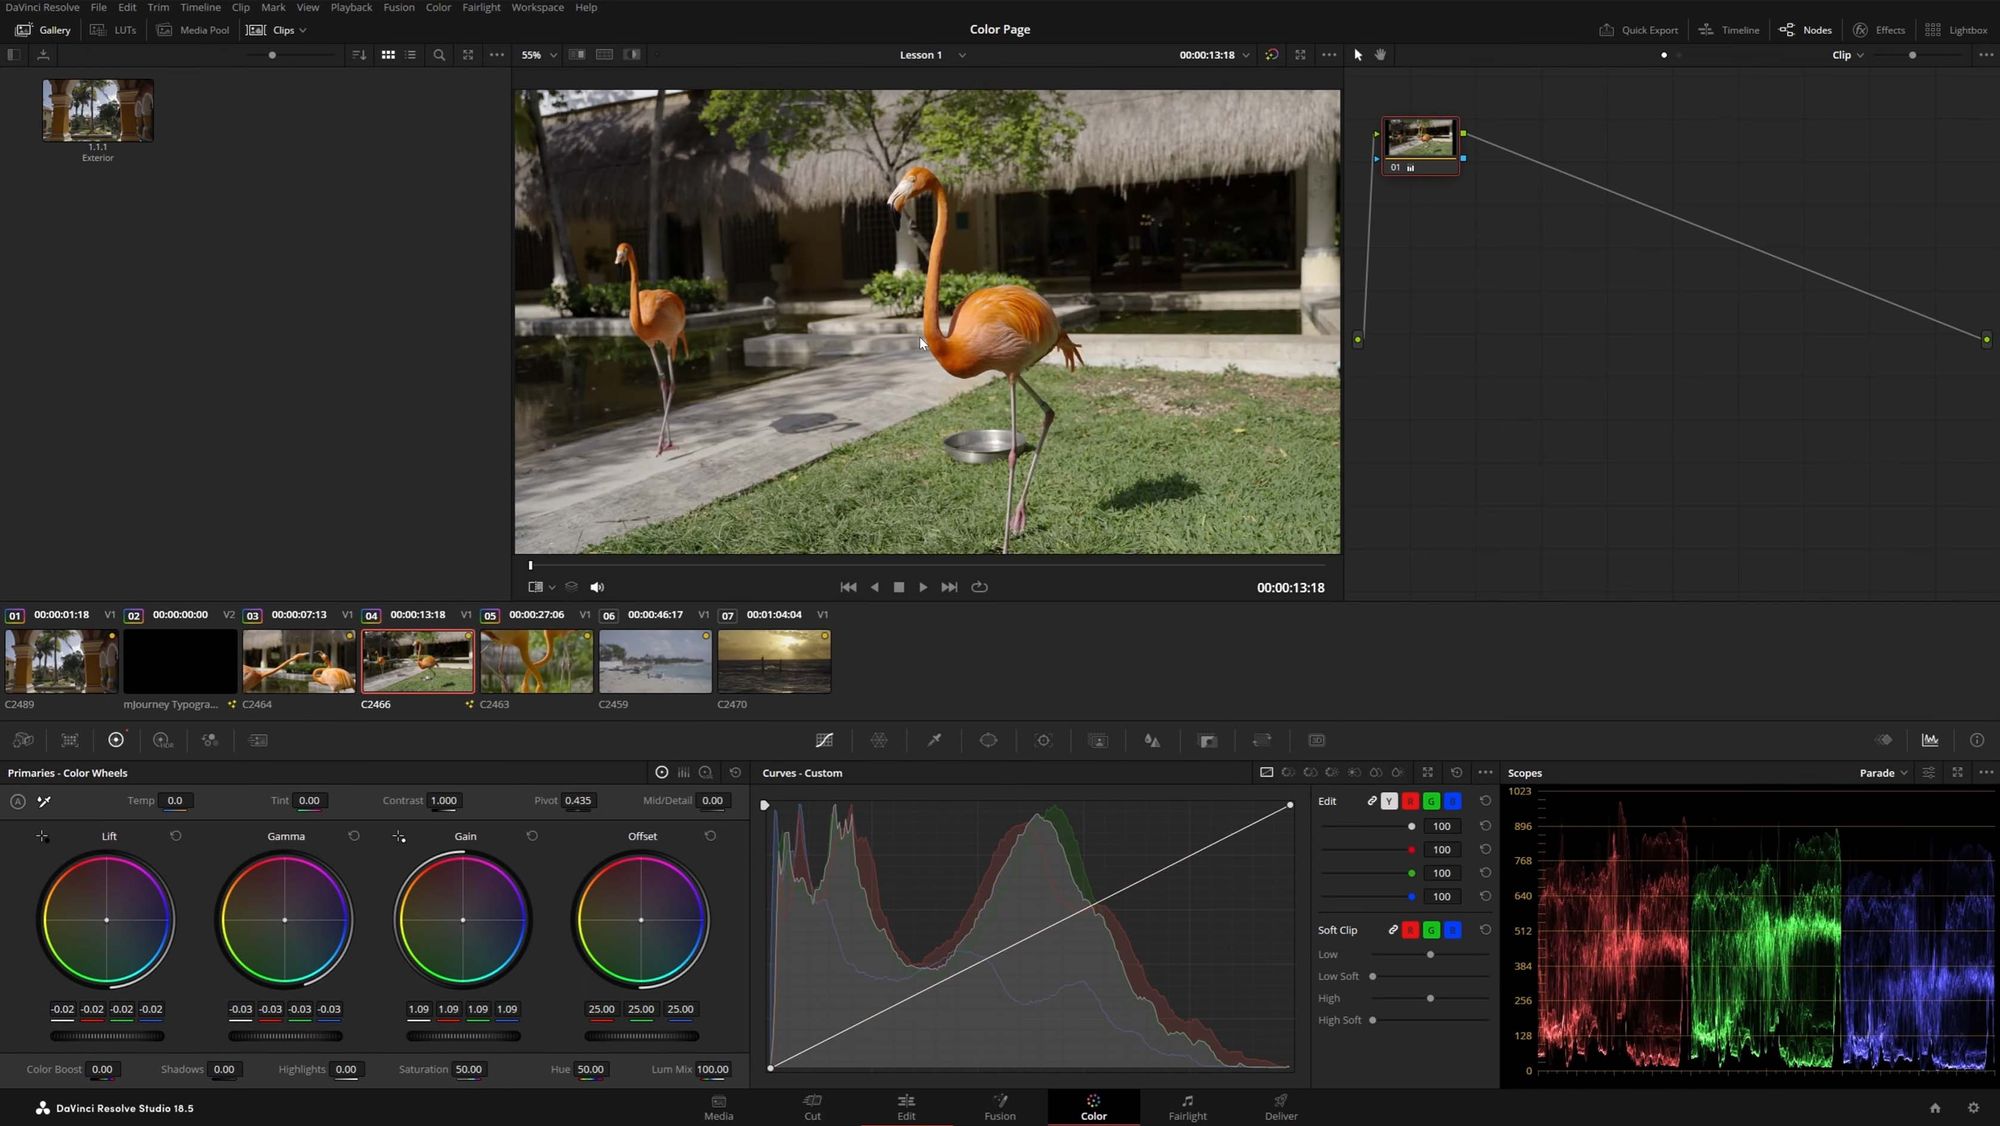 How good is DaVinci Resolve when it comes to color grading